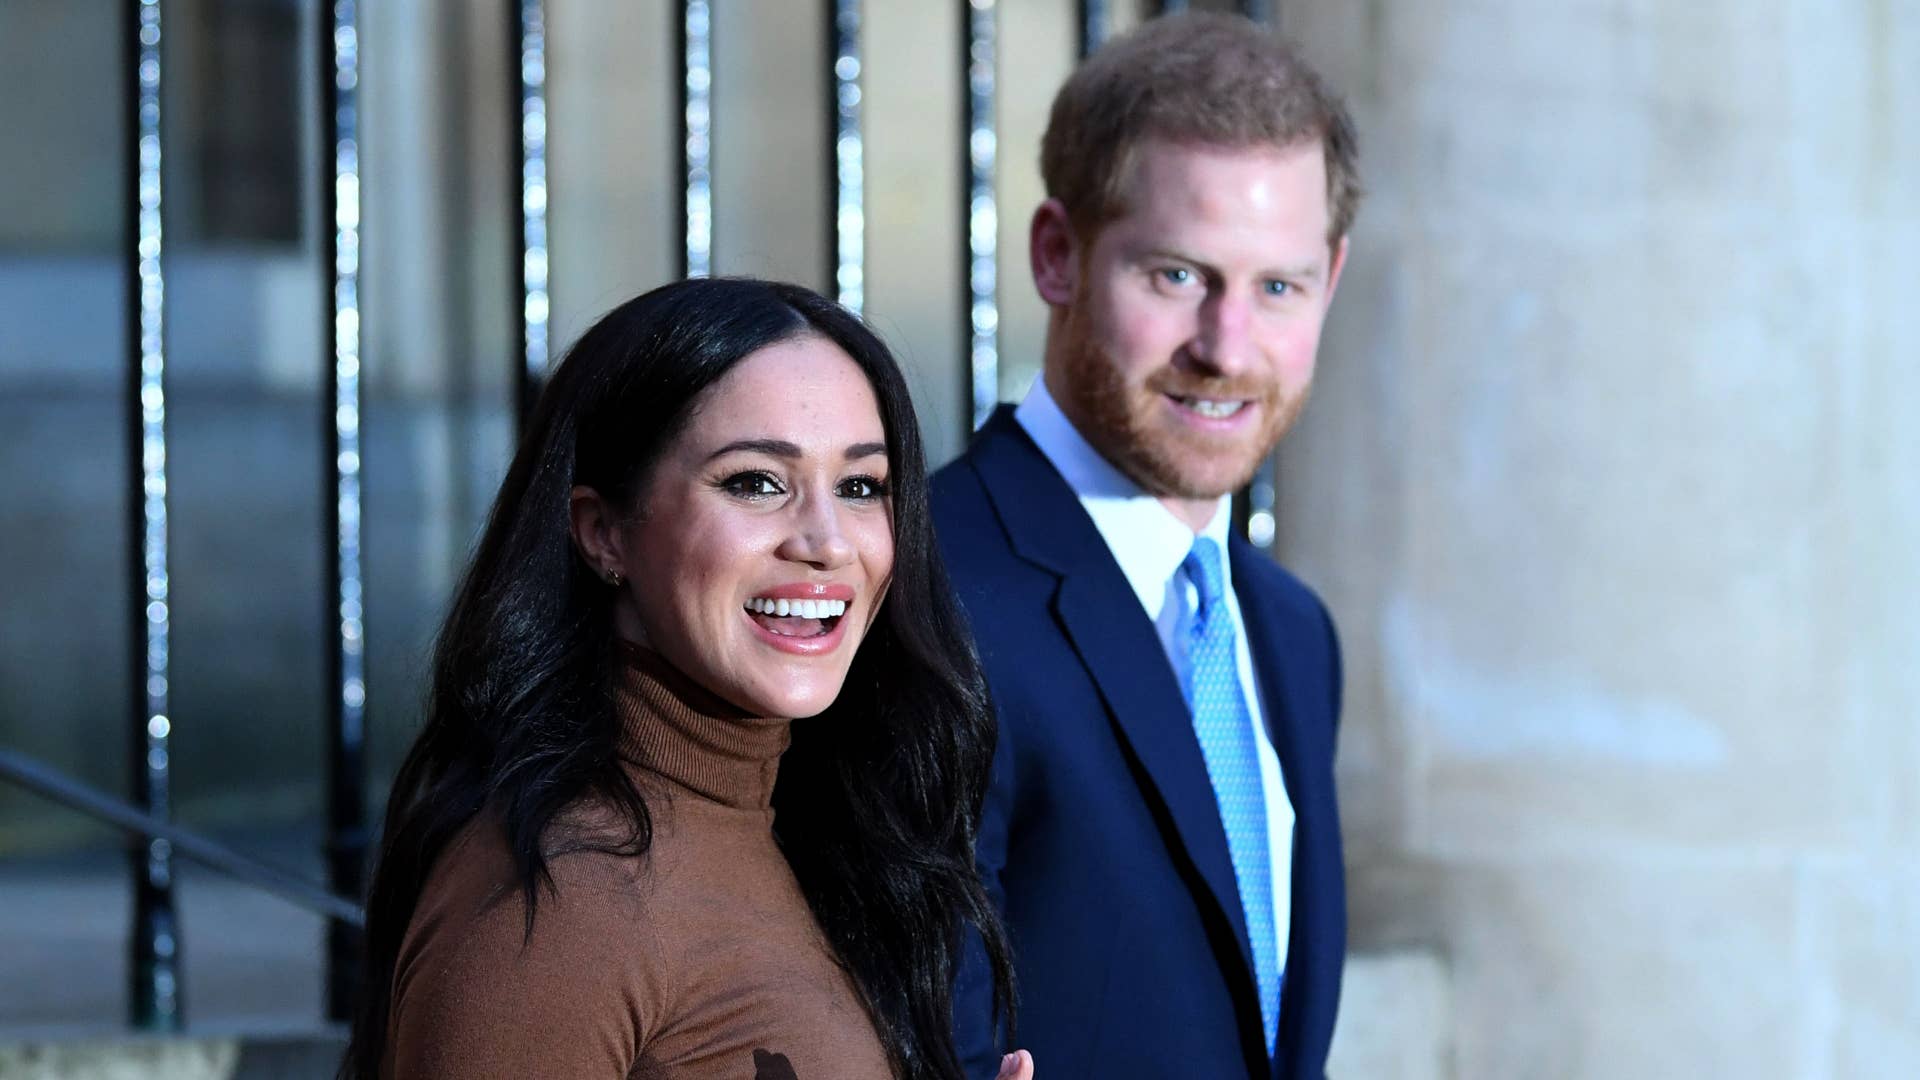 Prince Harry and Meghan Markle react after their visit to Canada House.